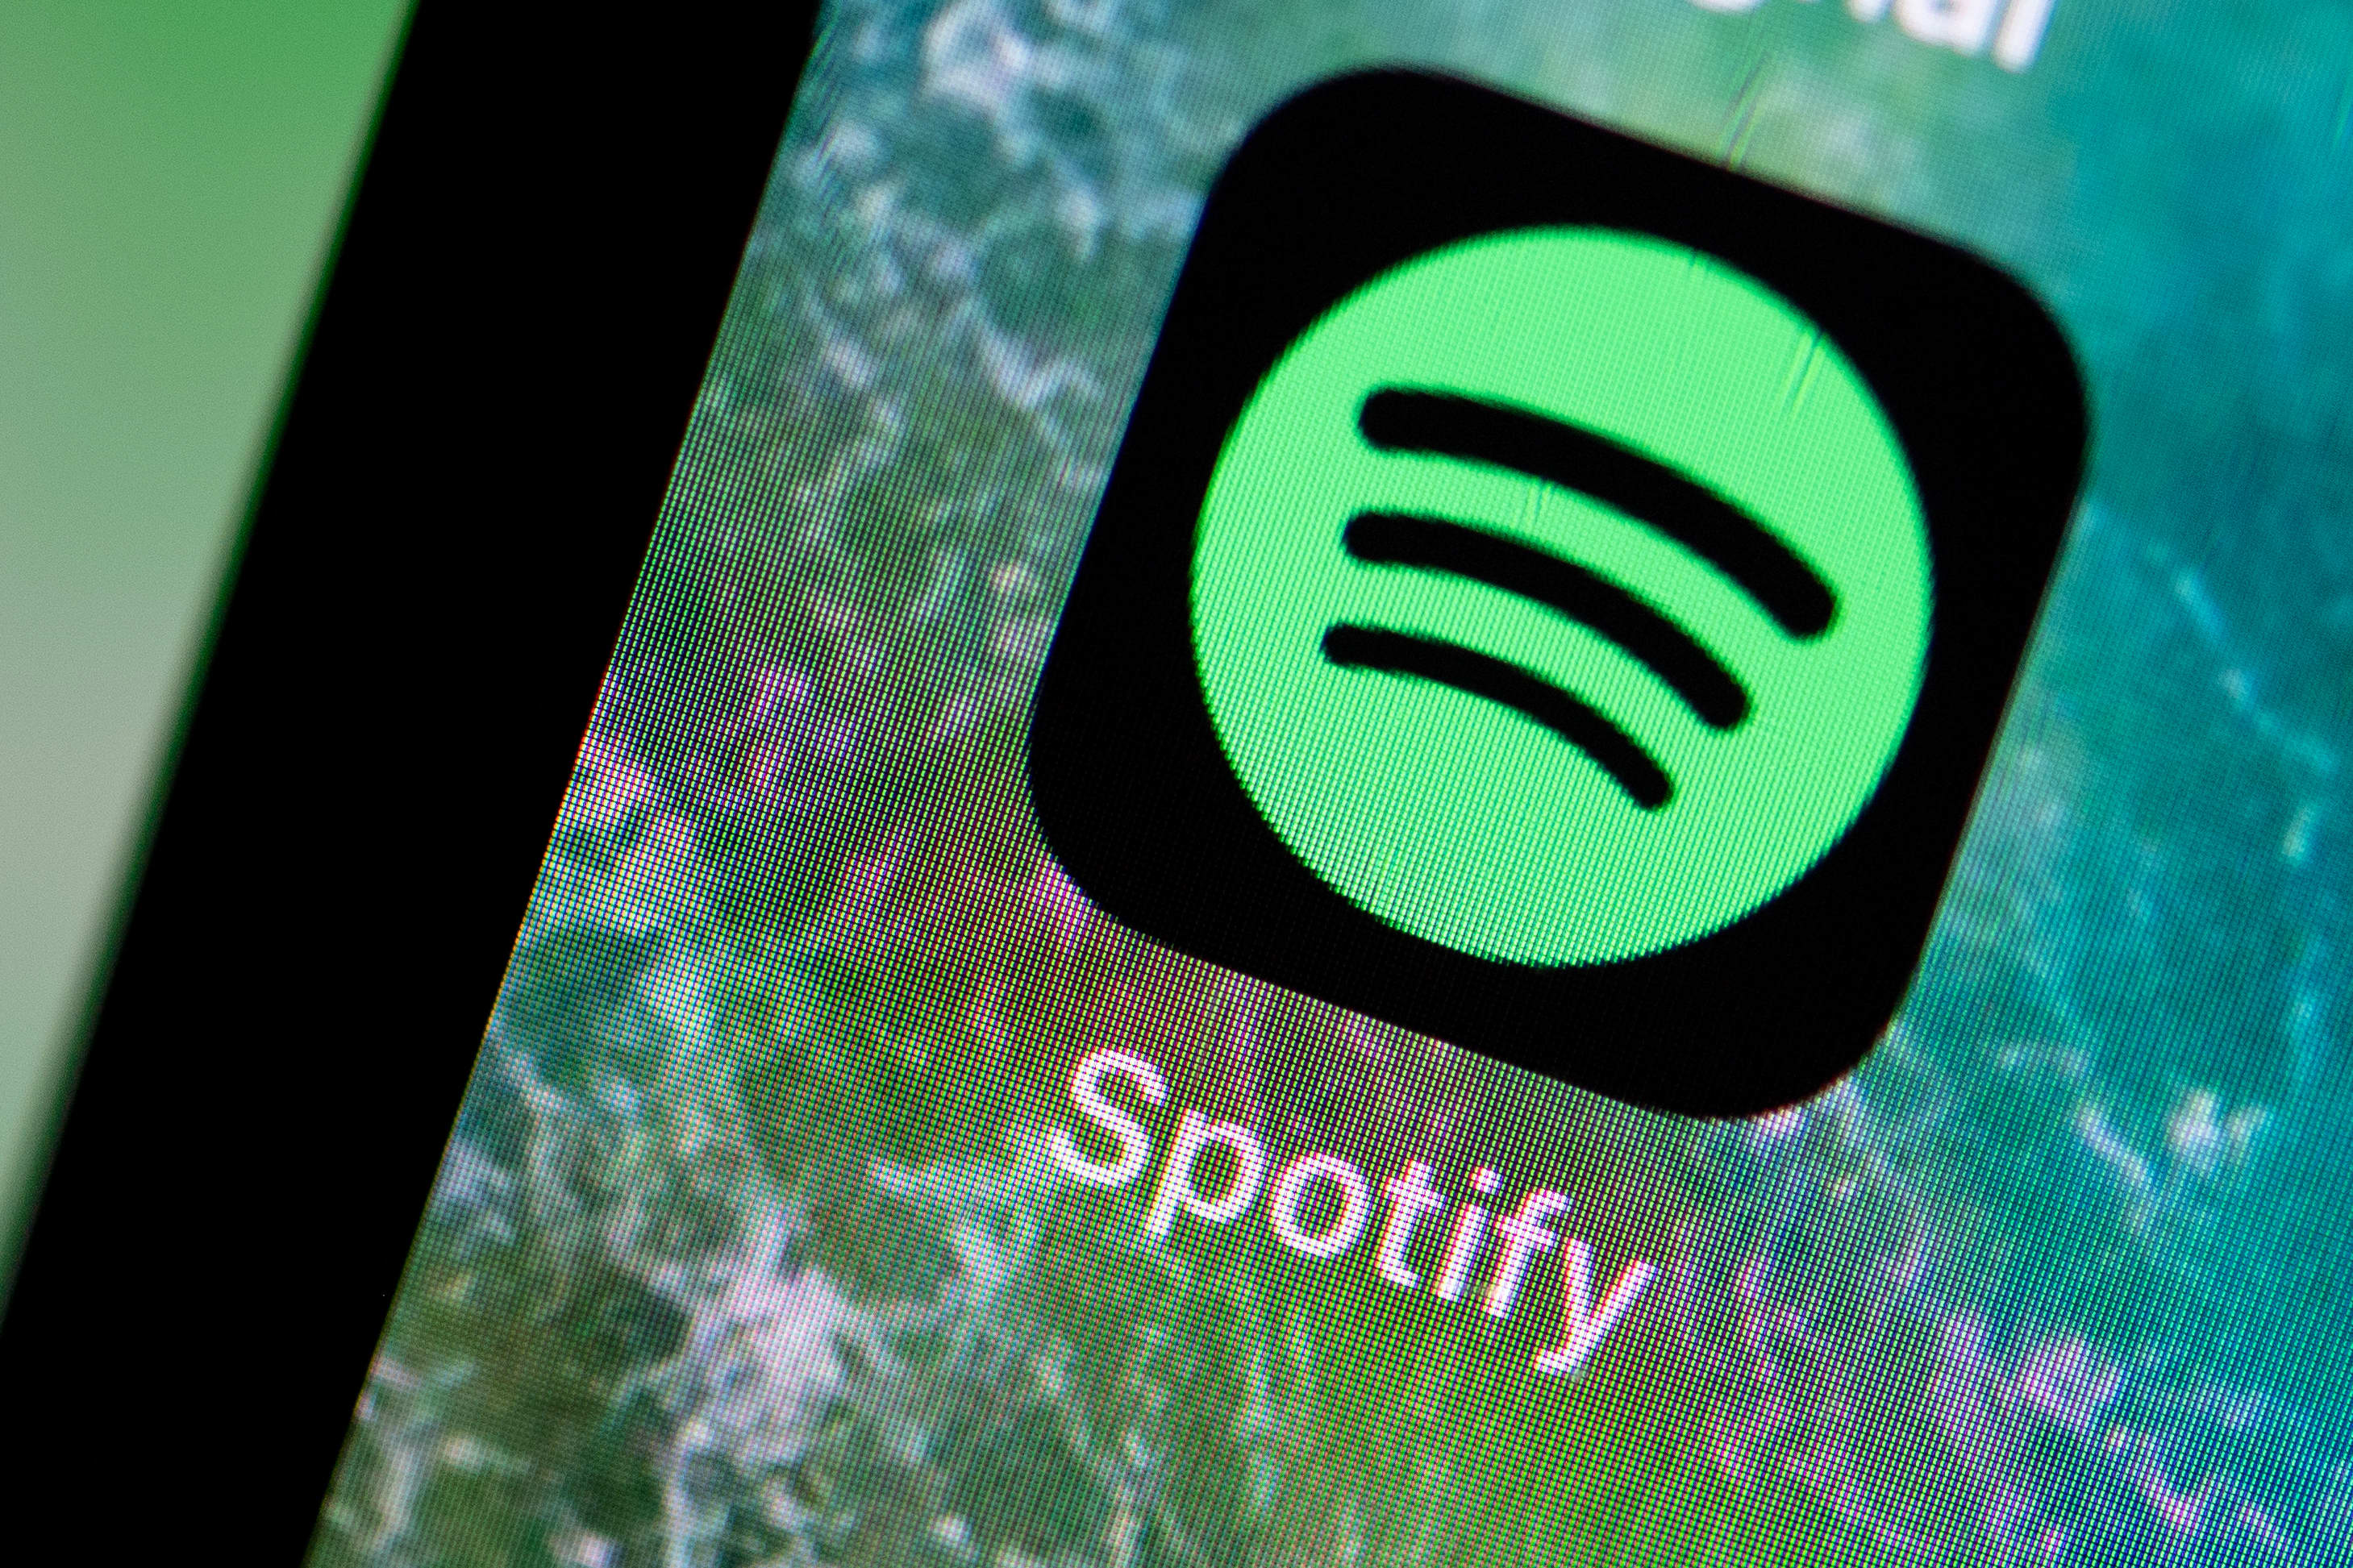 Spotify plans to launch in more than 80 countries